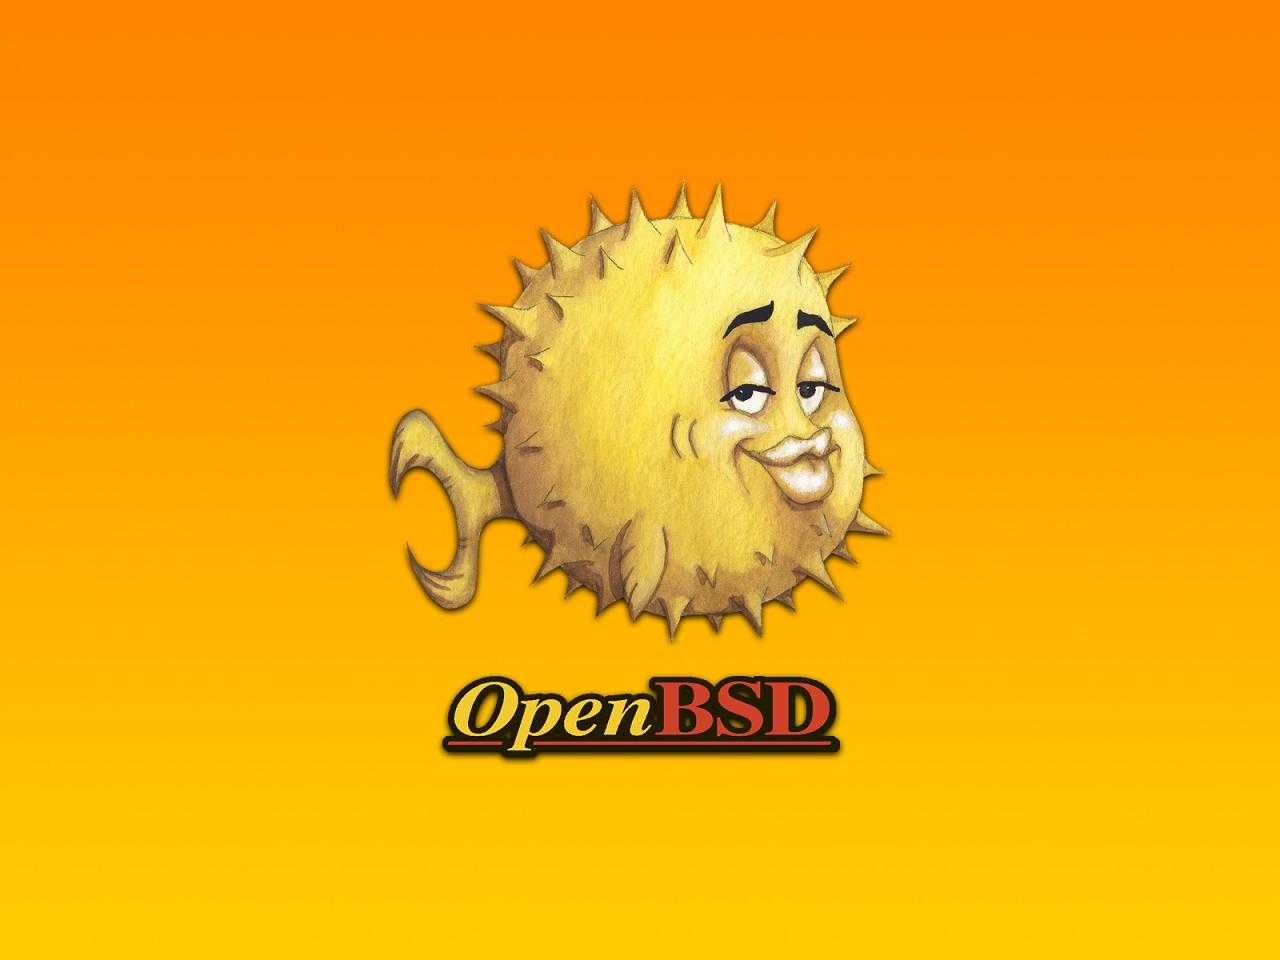 Openbsd